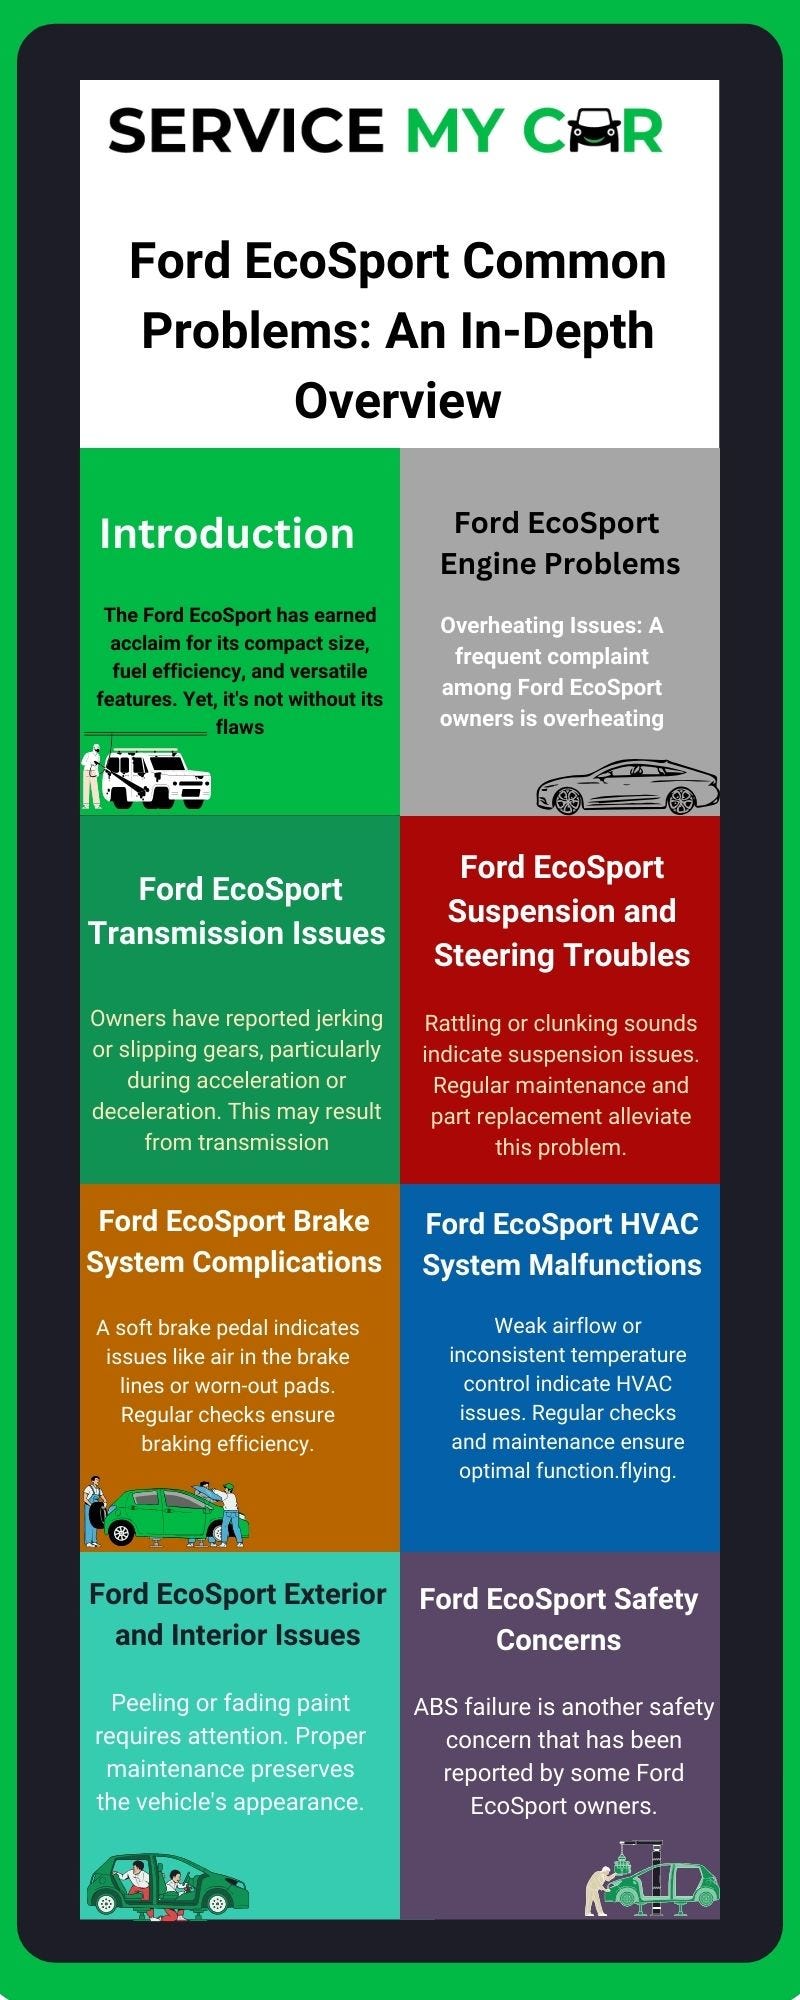 Ford EcoSport Common Problems: An In-Depth Overviews